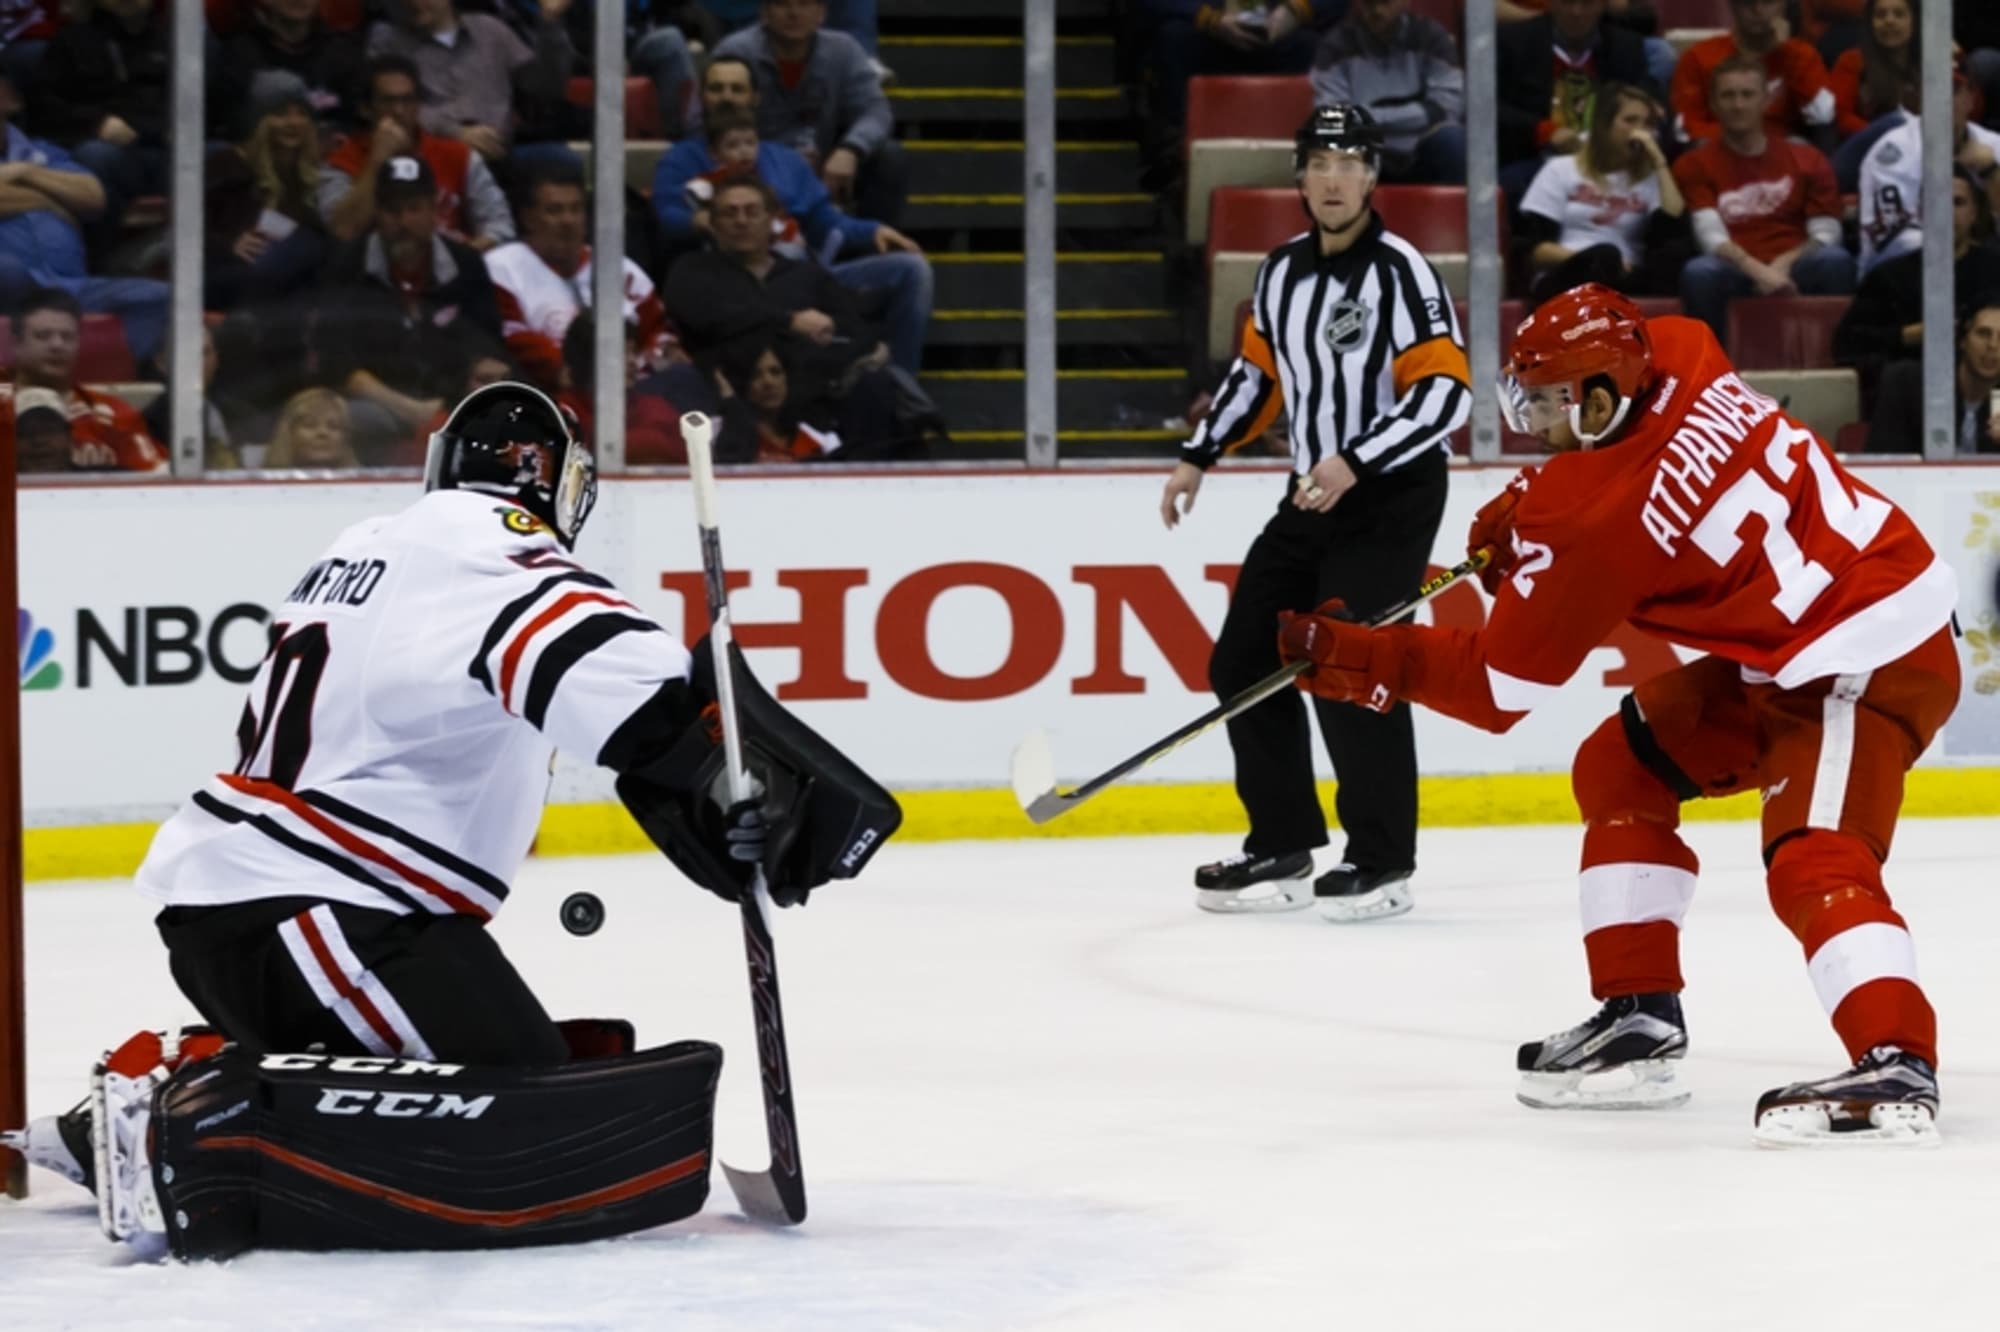 Detroit Red Wings at Blackhawks Game Time, TV, Radio, Live Stream